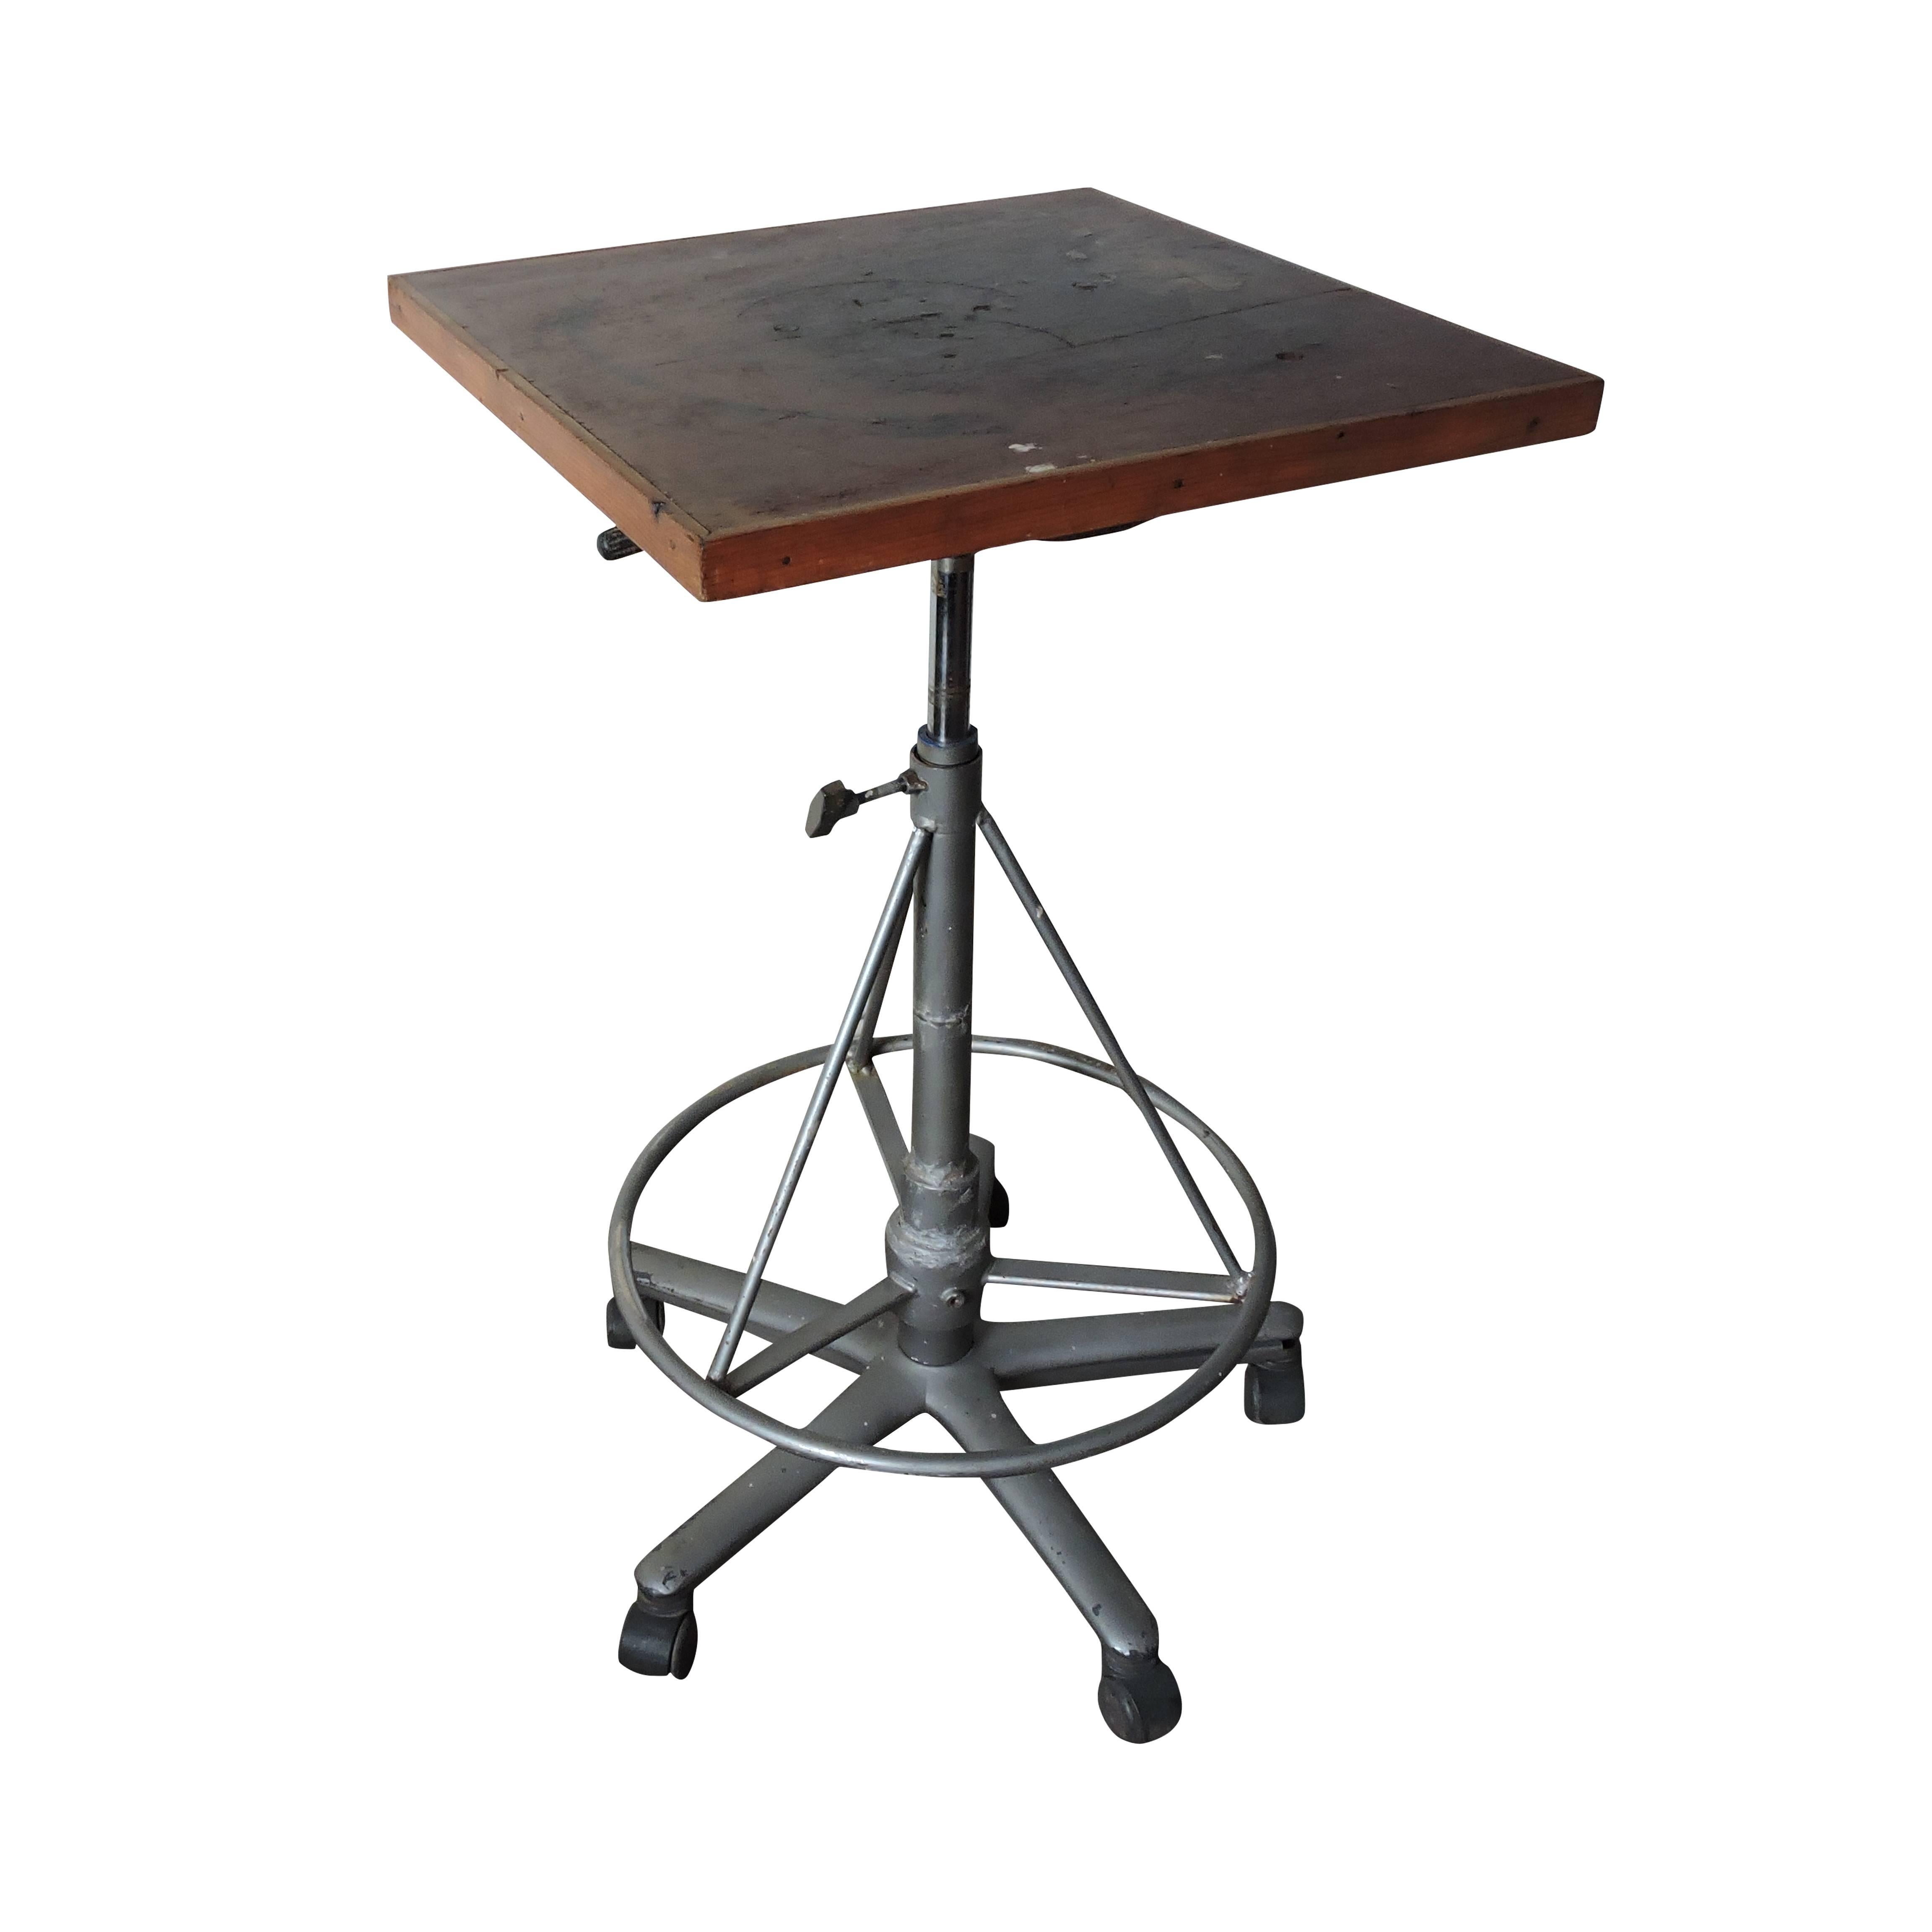 This Industrial painting and pottery table has a wooden top. It is adjustable and features a star base with wheels. Maximum 112cm - minimum 36cm. Table is sturdy.
